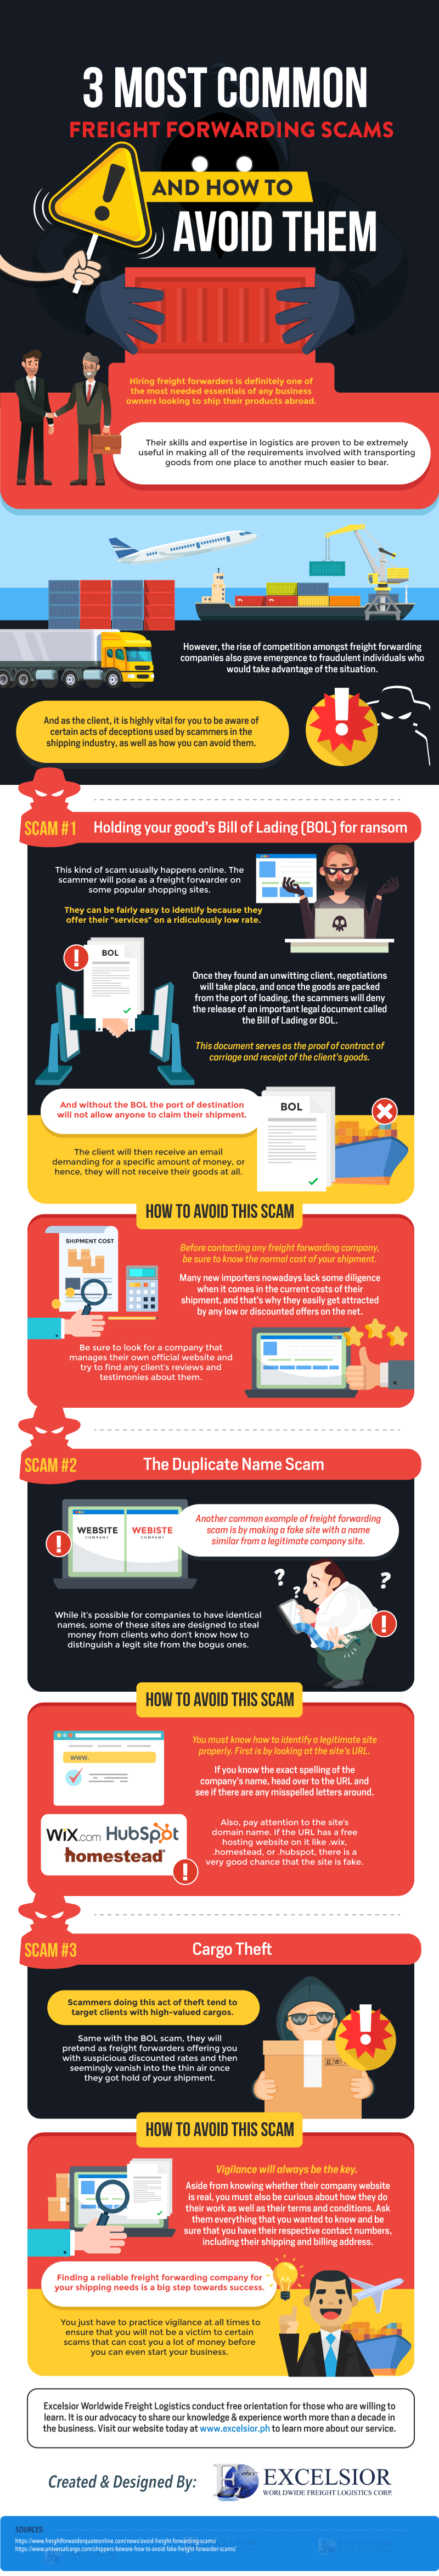 3 Most Common Freight Forwarding Scams And How To Avoid Them - Infographic